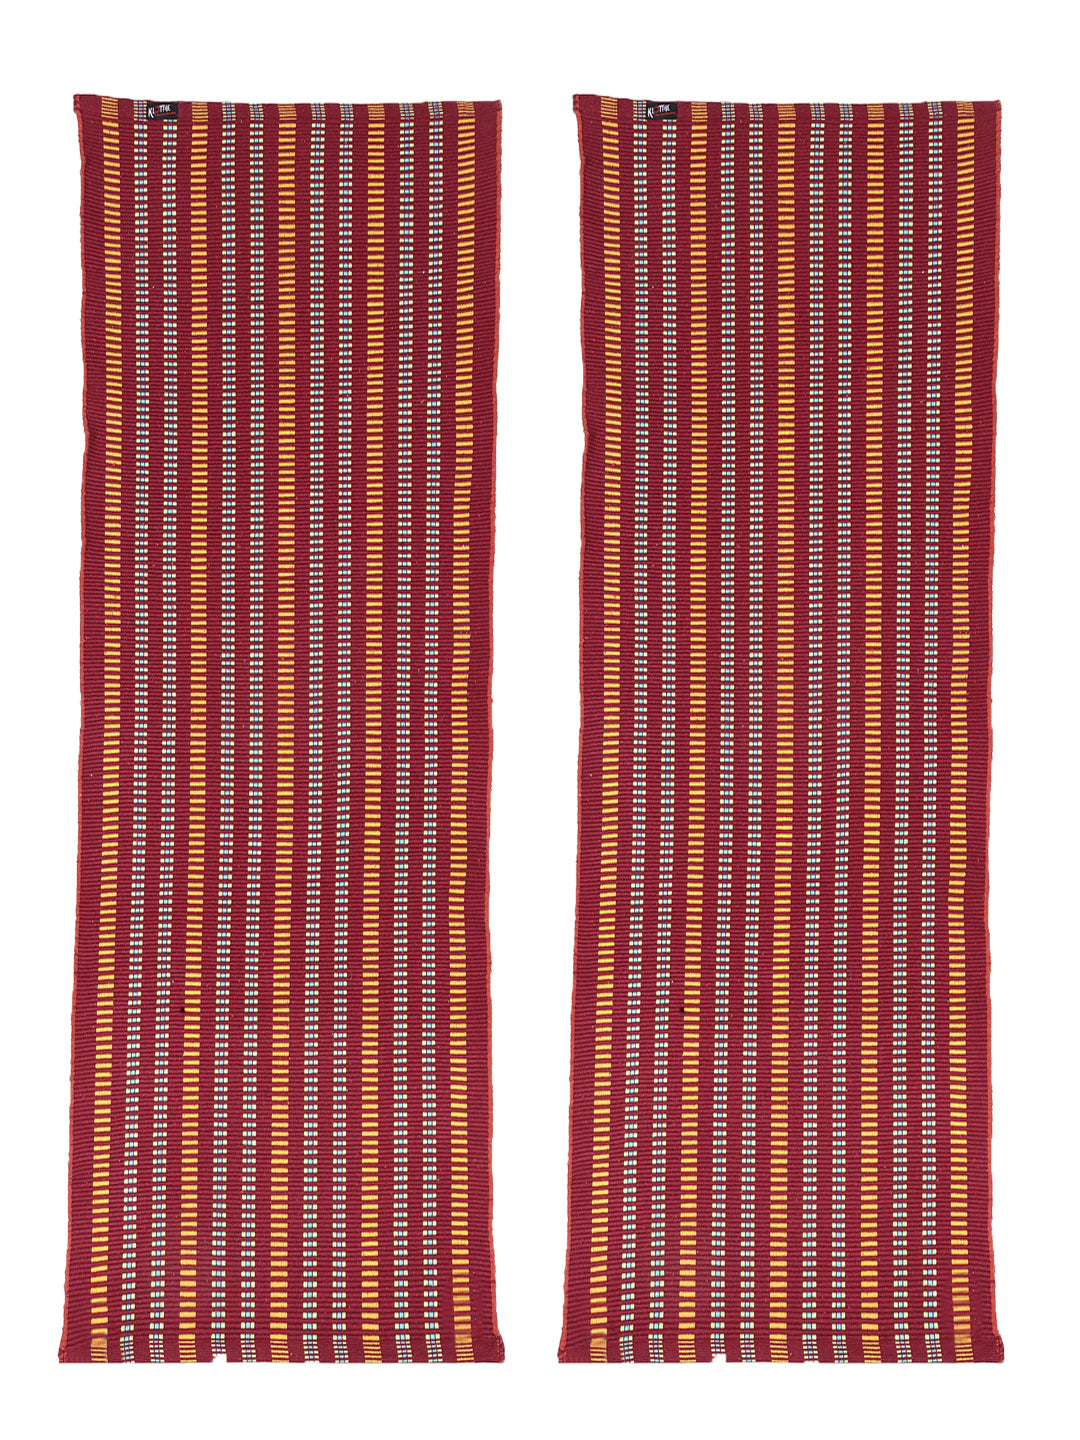 KLOTTHE Set of Two Red Cotton Striped Floor Mats & Dhurries 50X120 cm